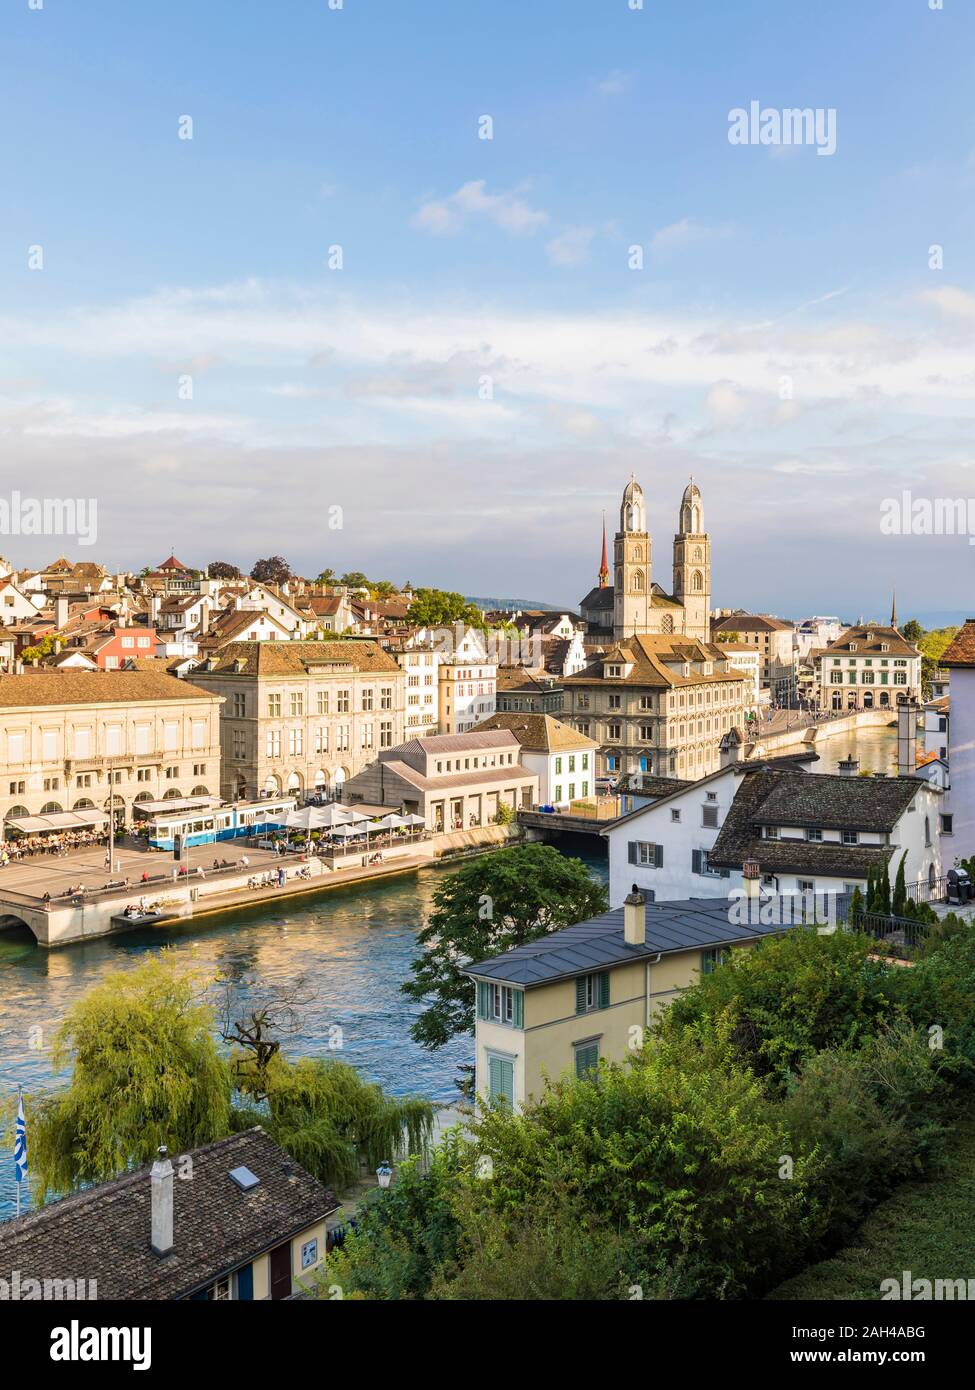 Switzerland, Canton of Zurich, Zurich, River Limmat and old town buildings along Limmatquai street Stock Photo